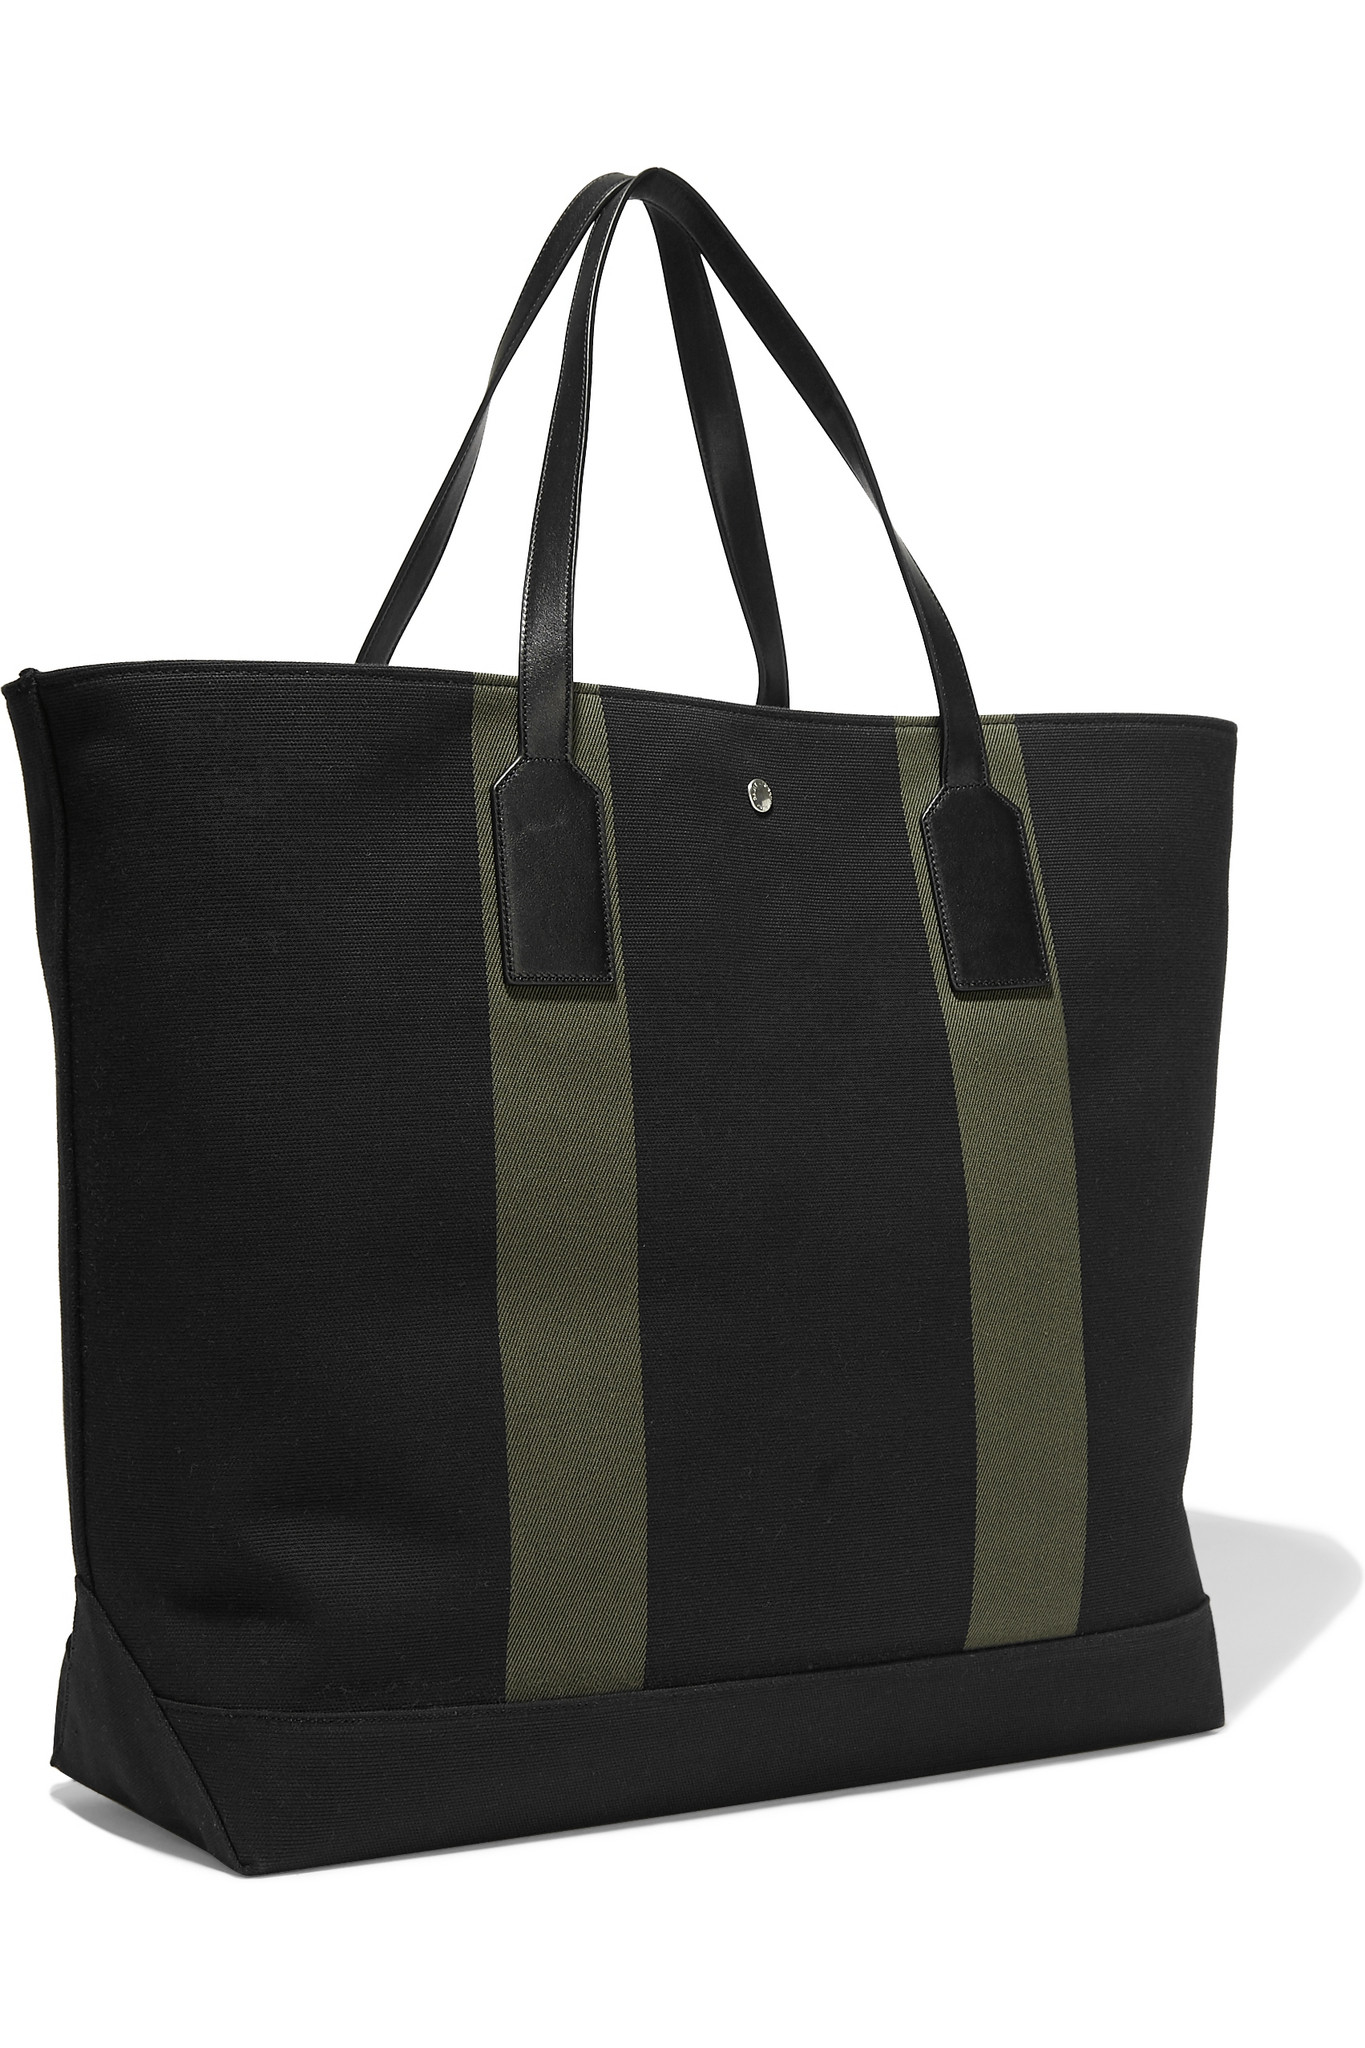 Lyst - Saint Laurent Beach Leather-trimmed Canvas Tote in Black